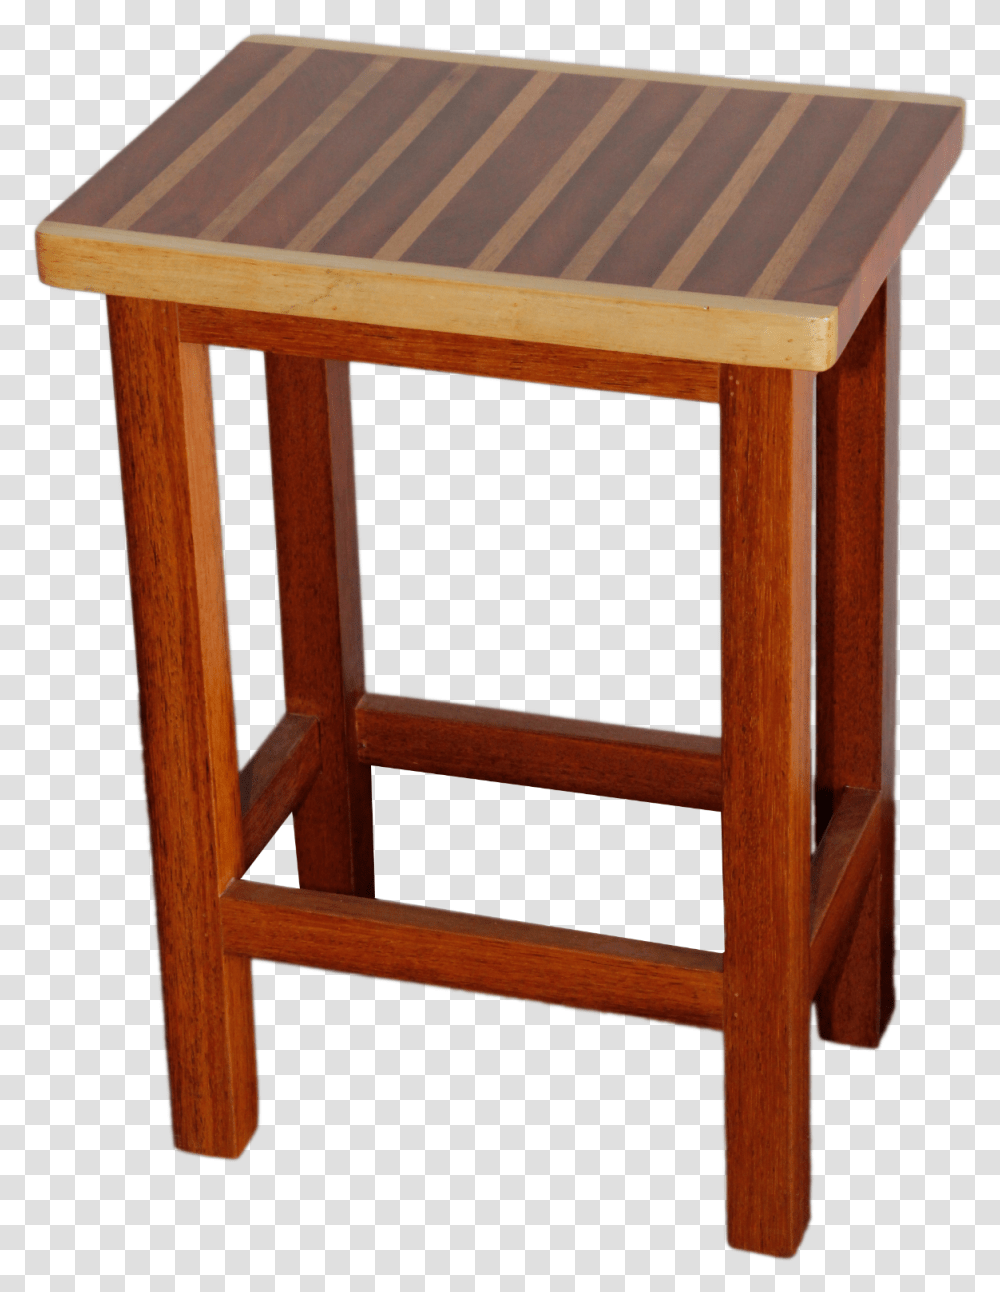 Wood Stool Seat Outdoor Table, Furniture, Chair, Dining Table, Coffee Table Transparent Png